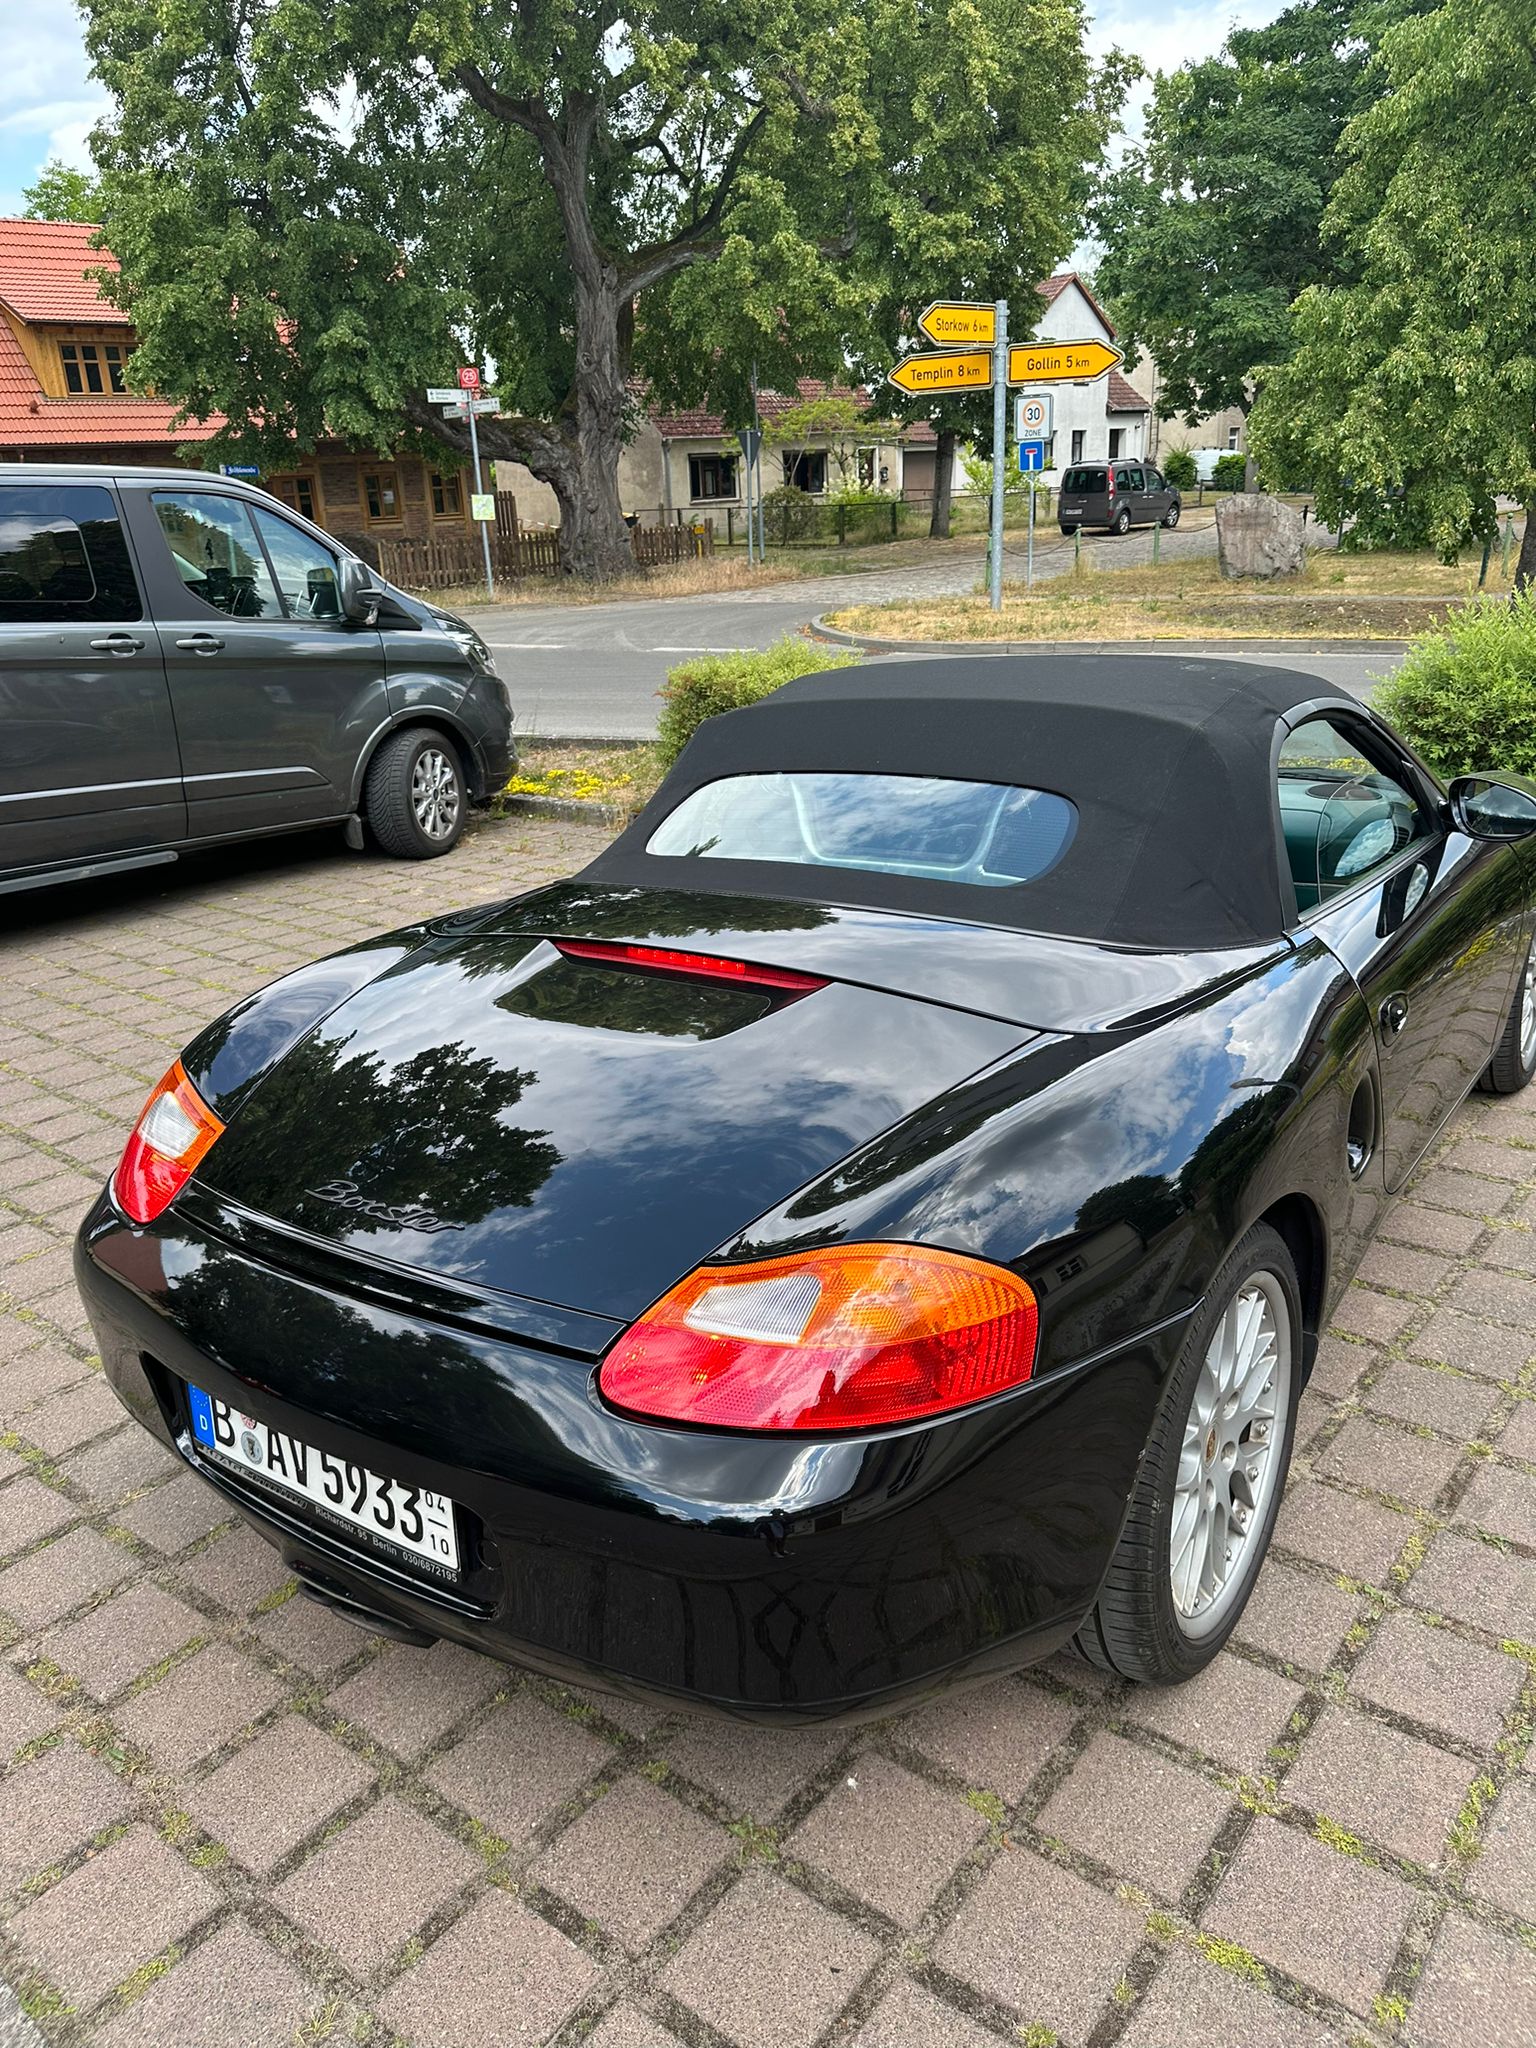 Black Porsche Boxster 986 Rear Side View Roof up